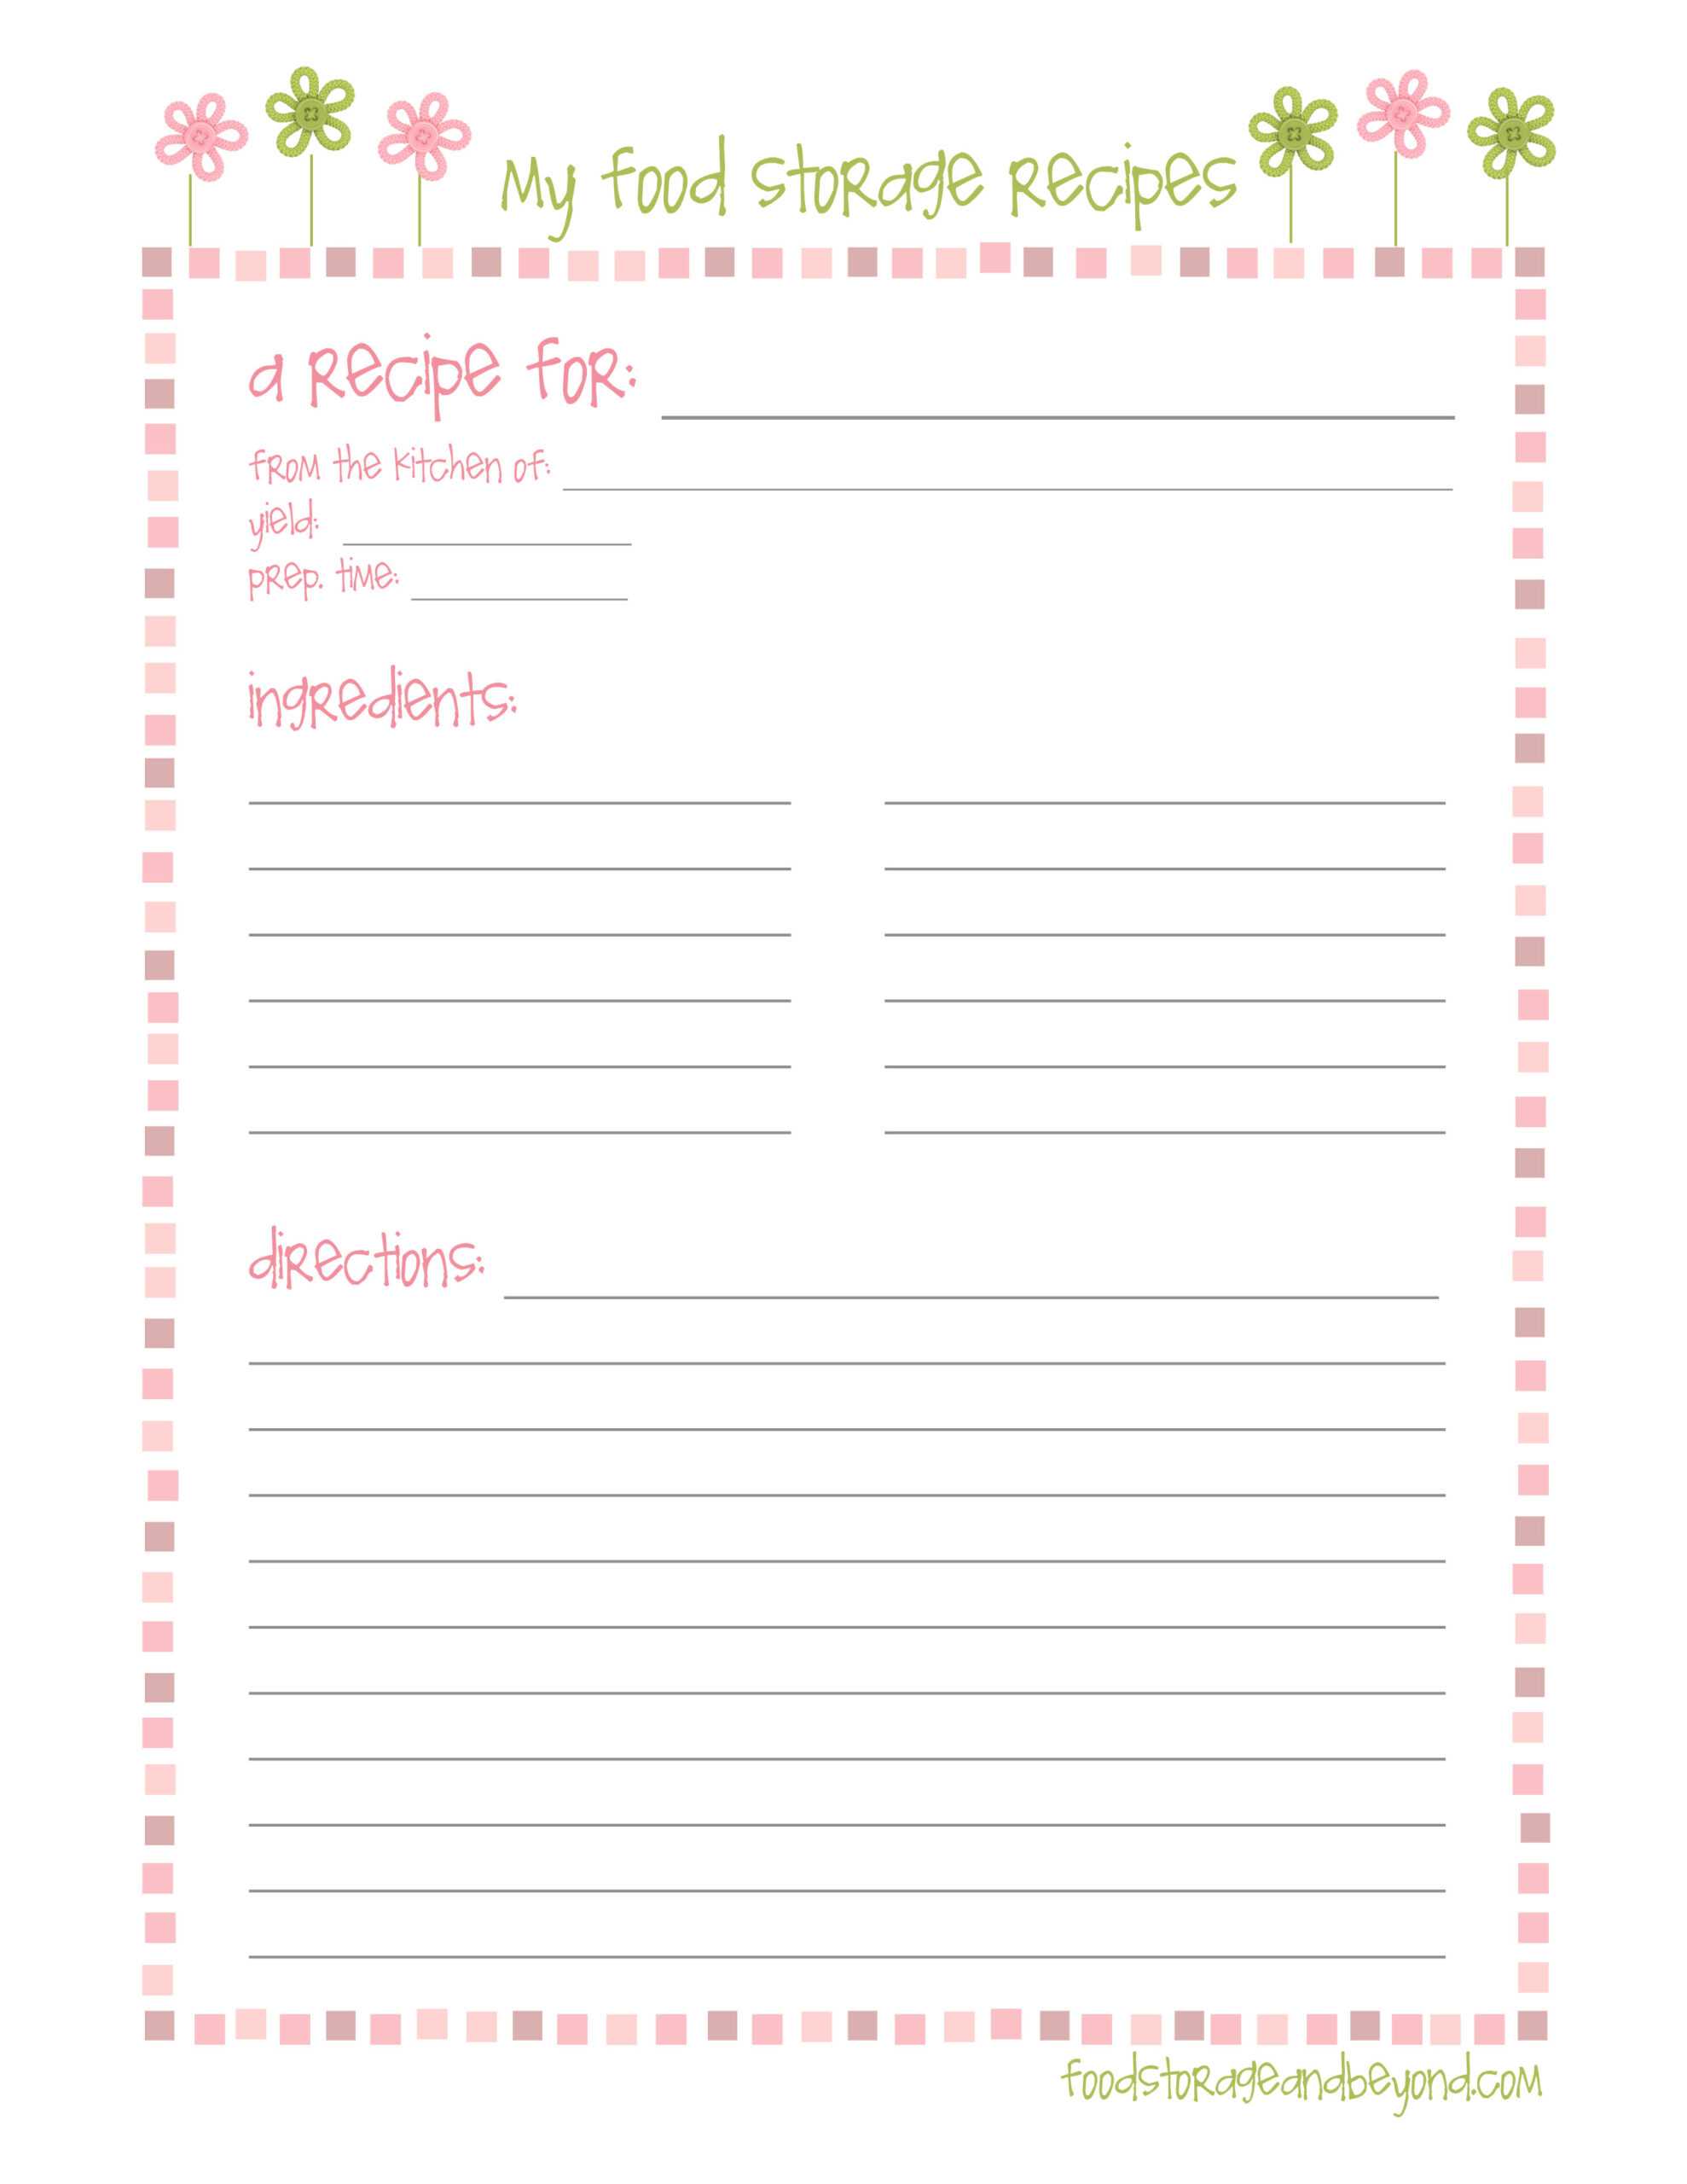 Pinjill Ortago On Happy Planning! | Printable Recipe Intended For Free Recipe Card Templates For Microsoft Word